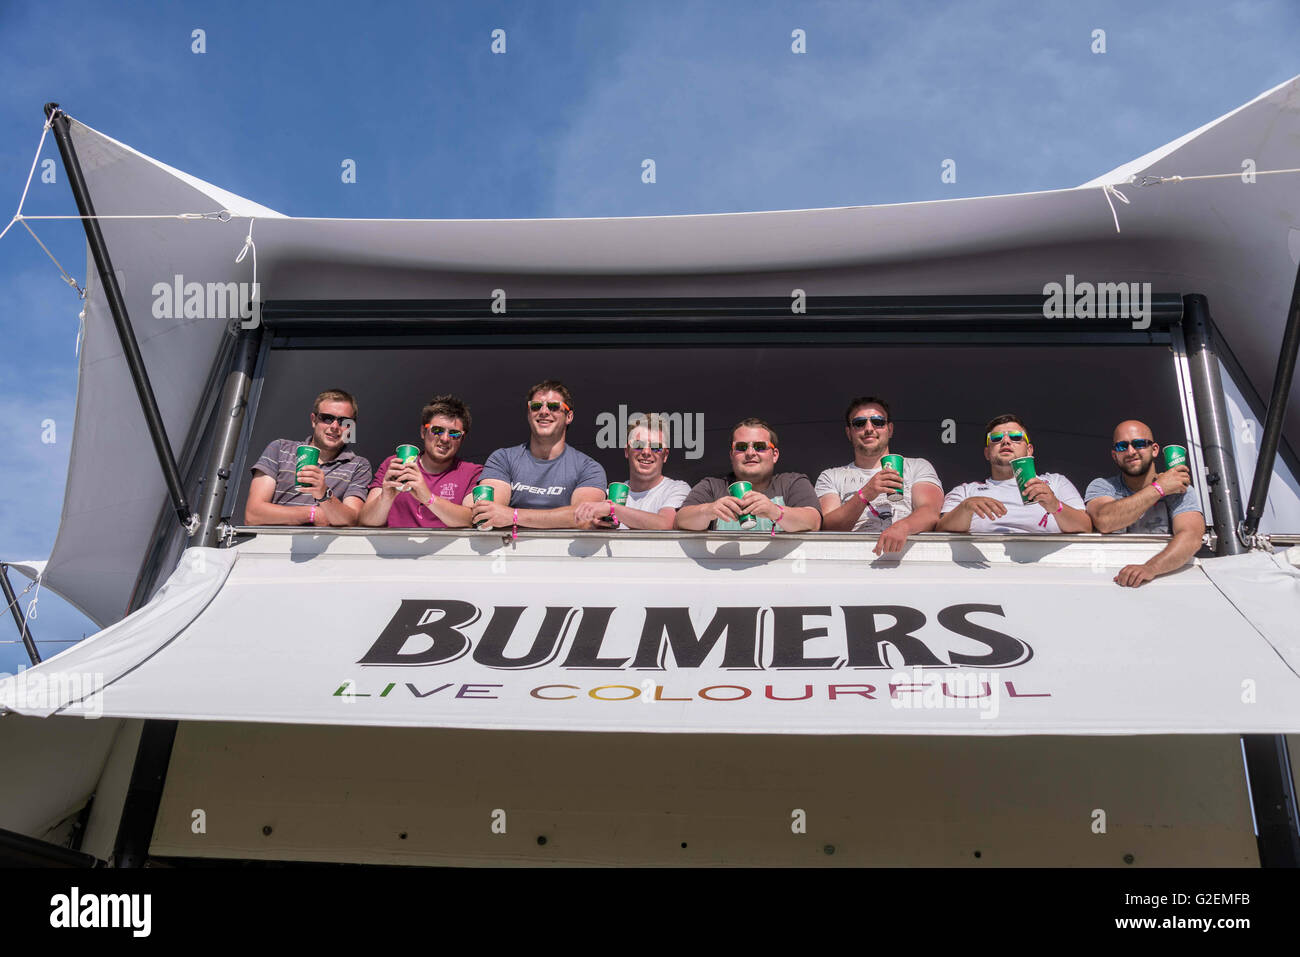 Christchurch, Dorset, UK. 29th May 2016. Bournemouth 7's Festival. Annual event at Bournemouth Sports Club.  Credit:  Gillian Downes/Alamy Live News. Stock Photo